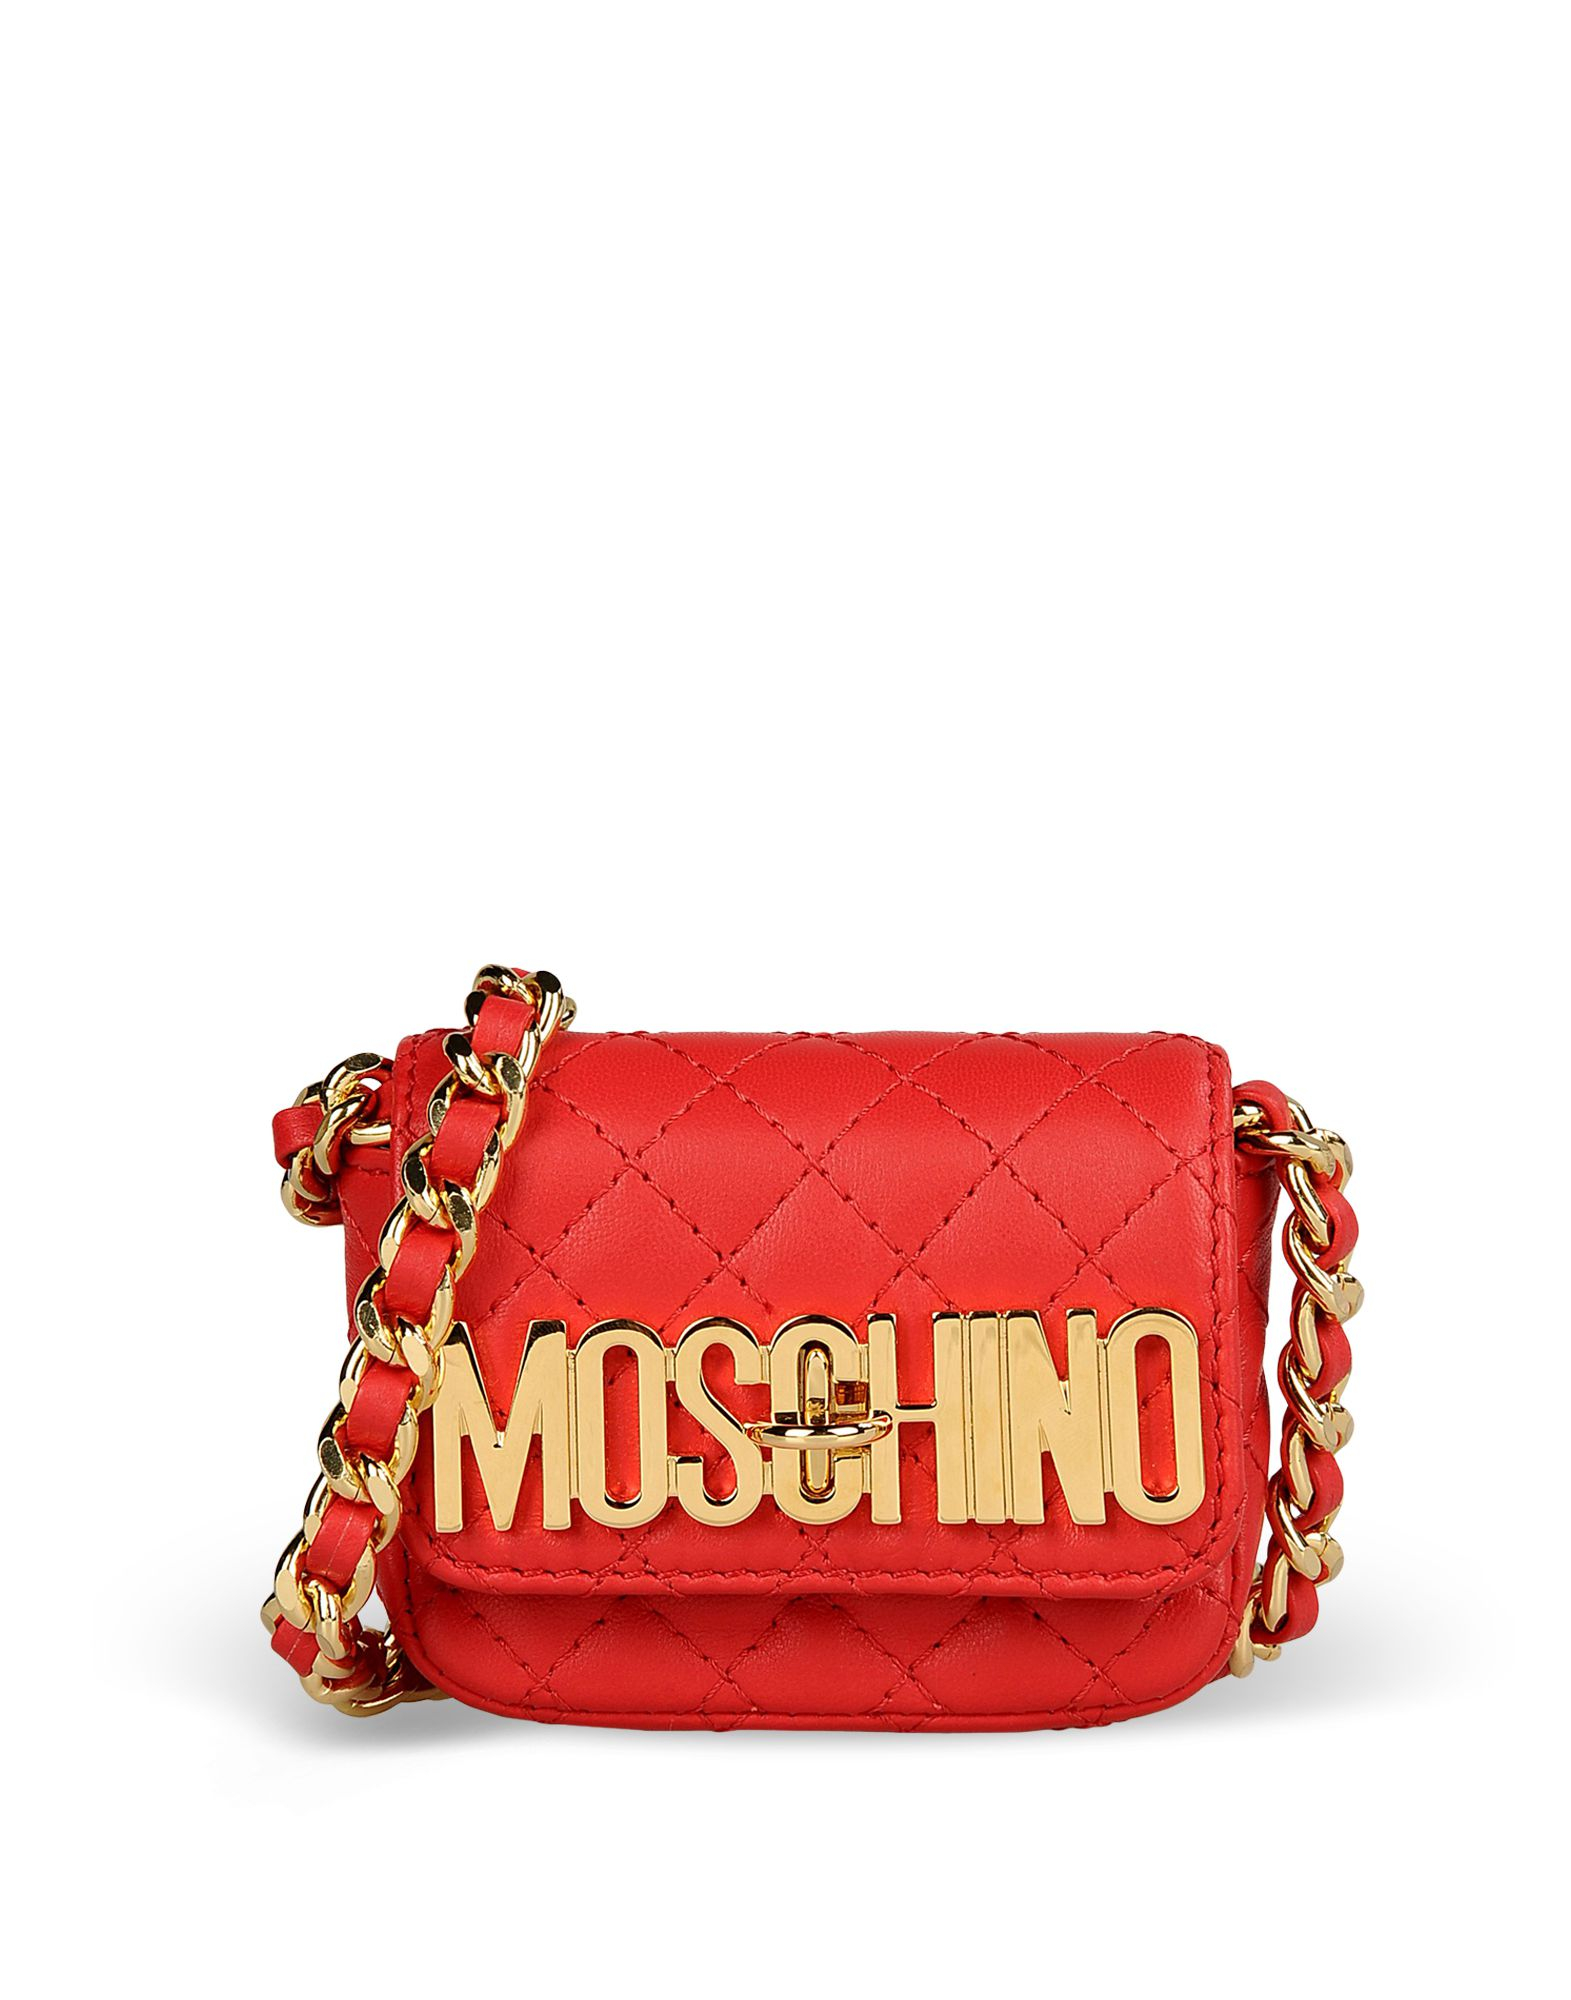 Lyst - Moschino Small Leather Bag in Red